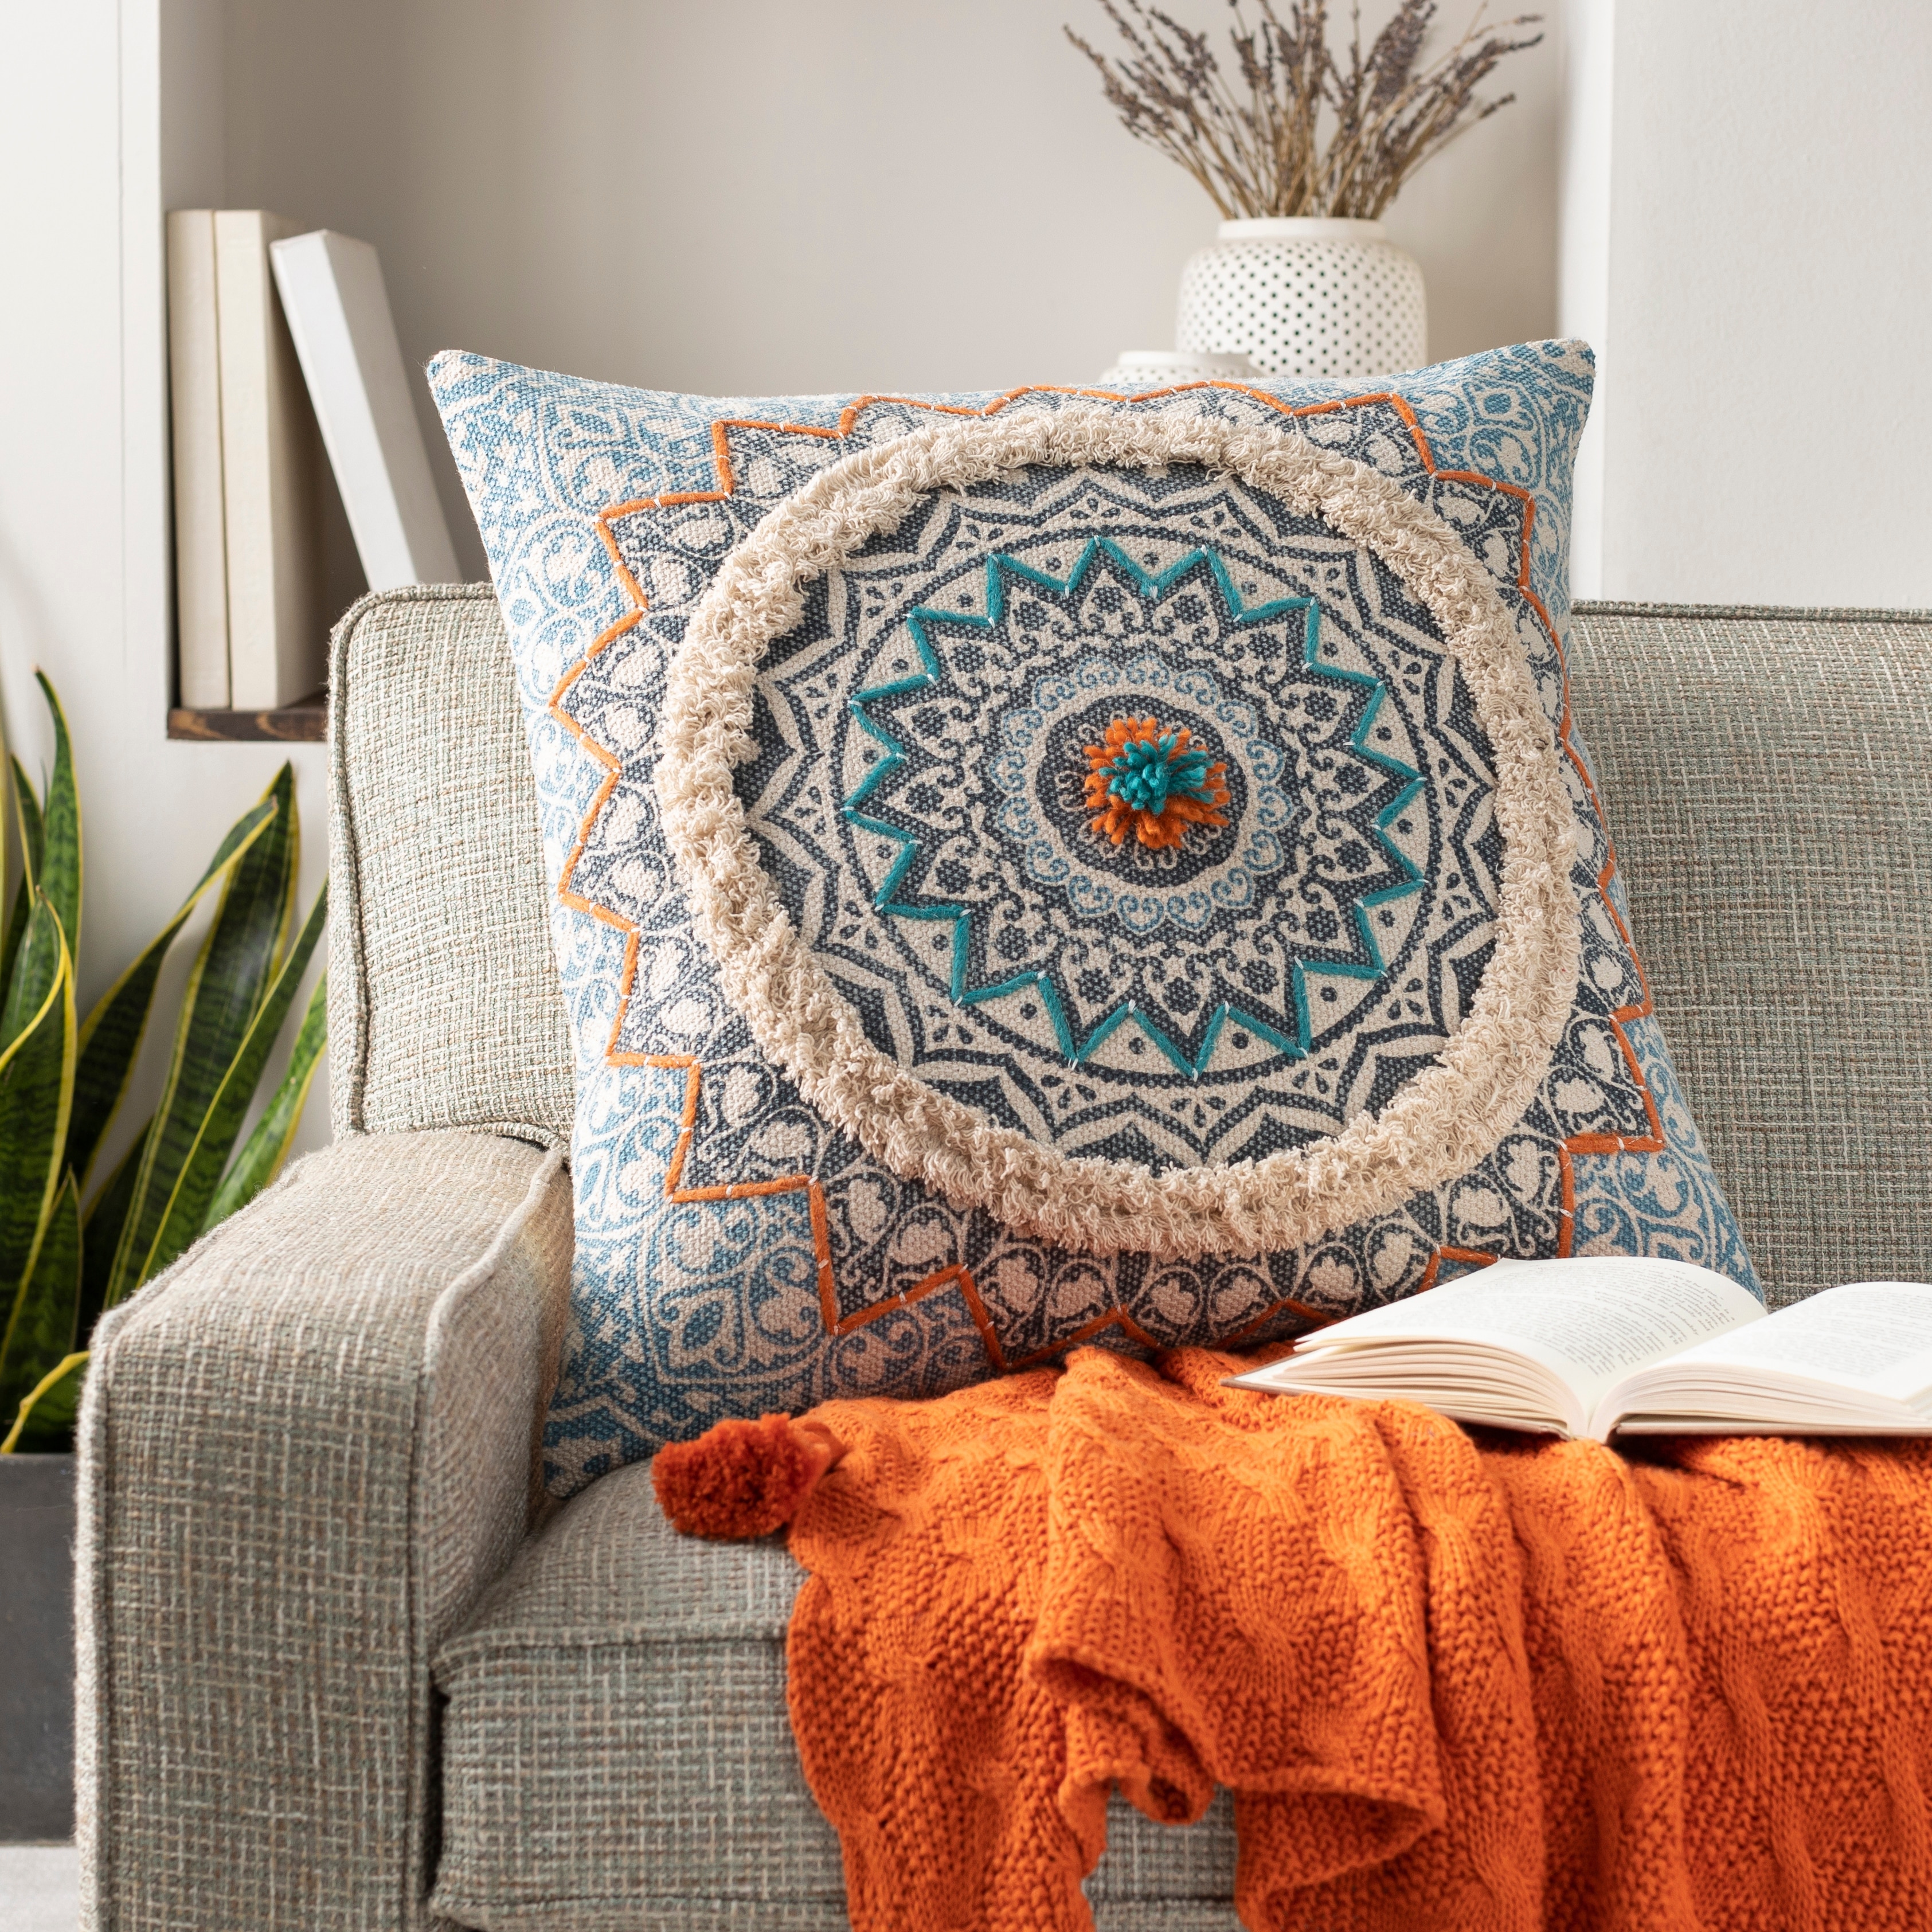 https://ak1.ostkcdn.com/images/products/is/images/direct/03f08018e4be639091e2ac8a865198c09bd9a98d/Cerena-Hand-Embroidered-Boho-Throw-Pillow.jpg